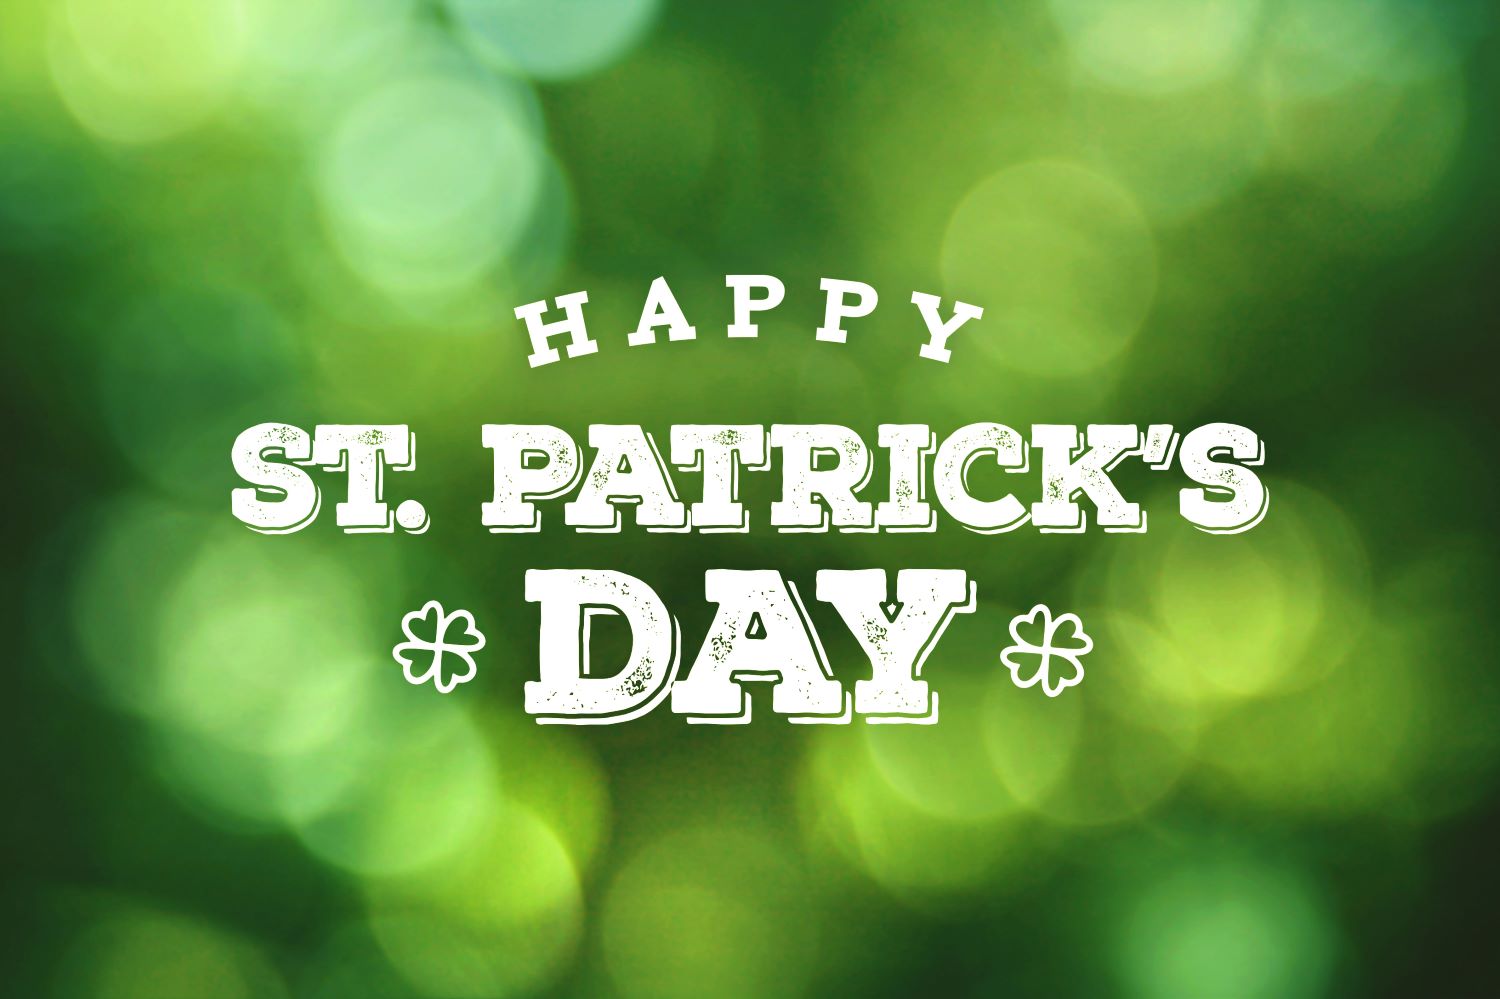 Happy St. Patricks's Day with green background